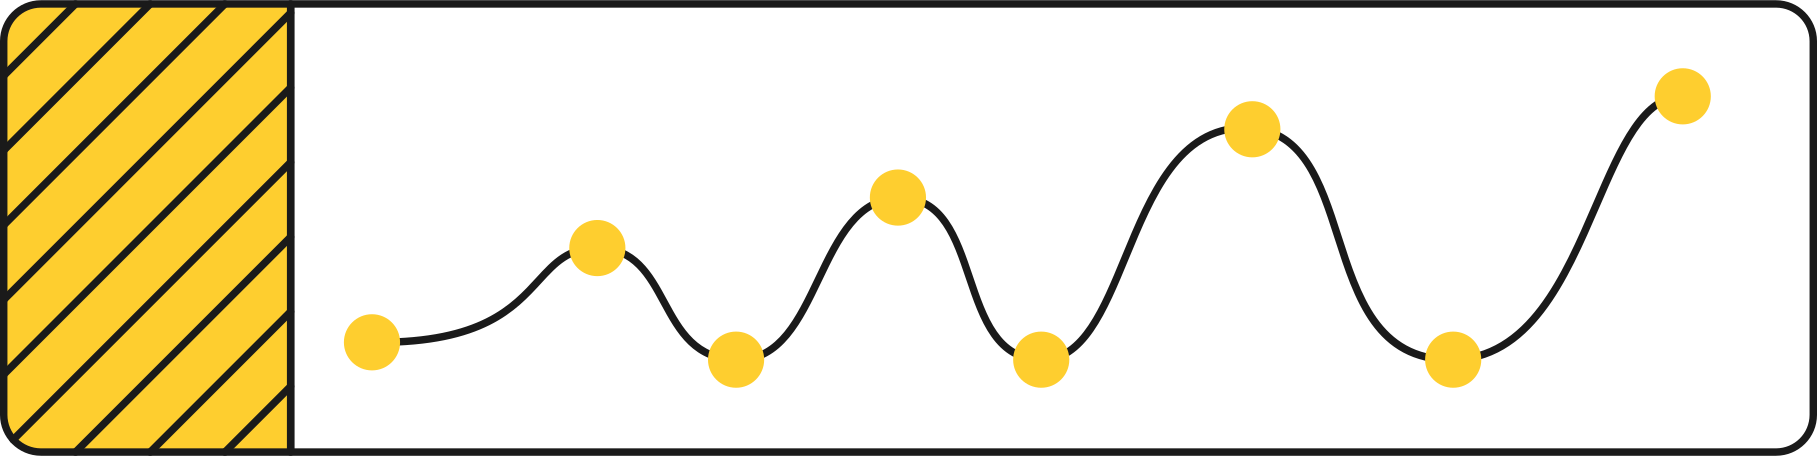 curve plot with dots in window Illustration in PNG, SVG